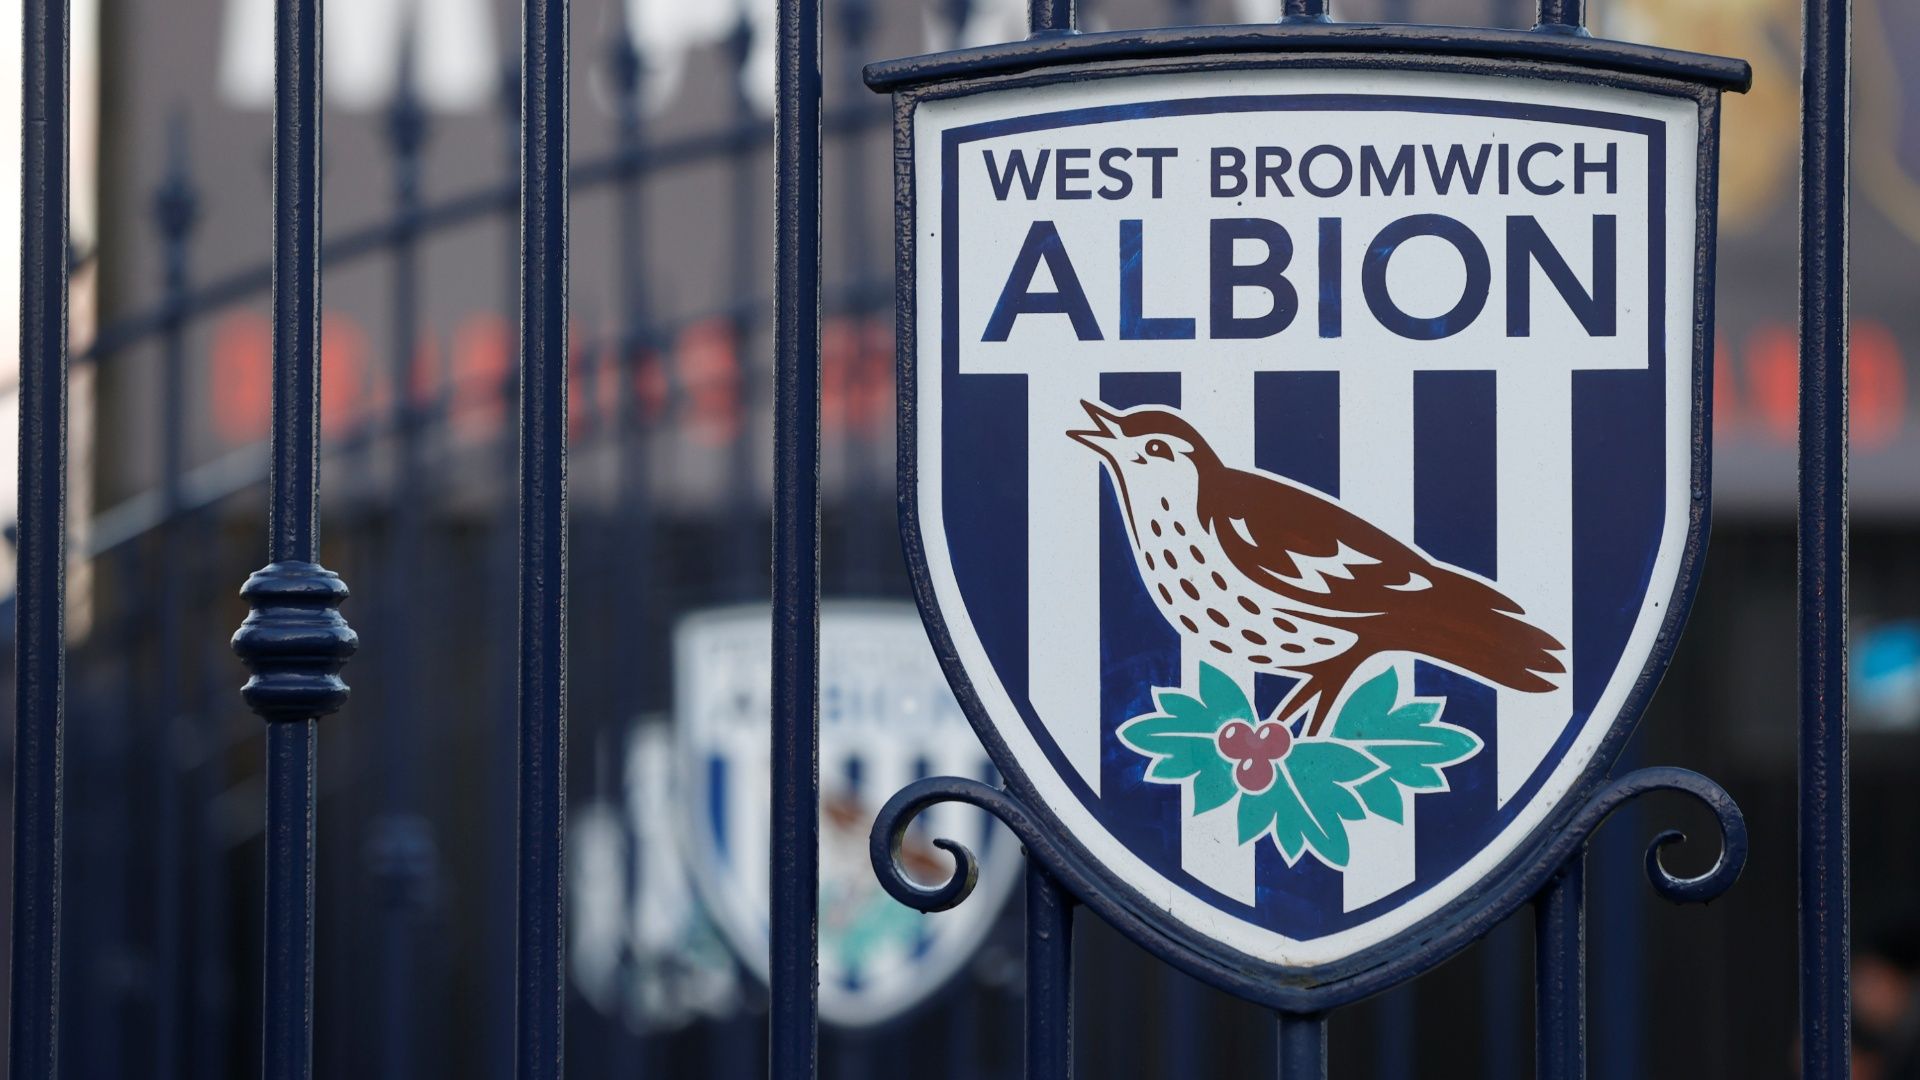 Why are West Bromwich Albion called the Baggies?